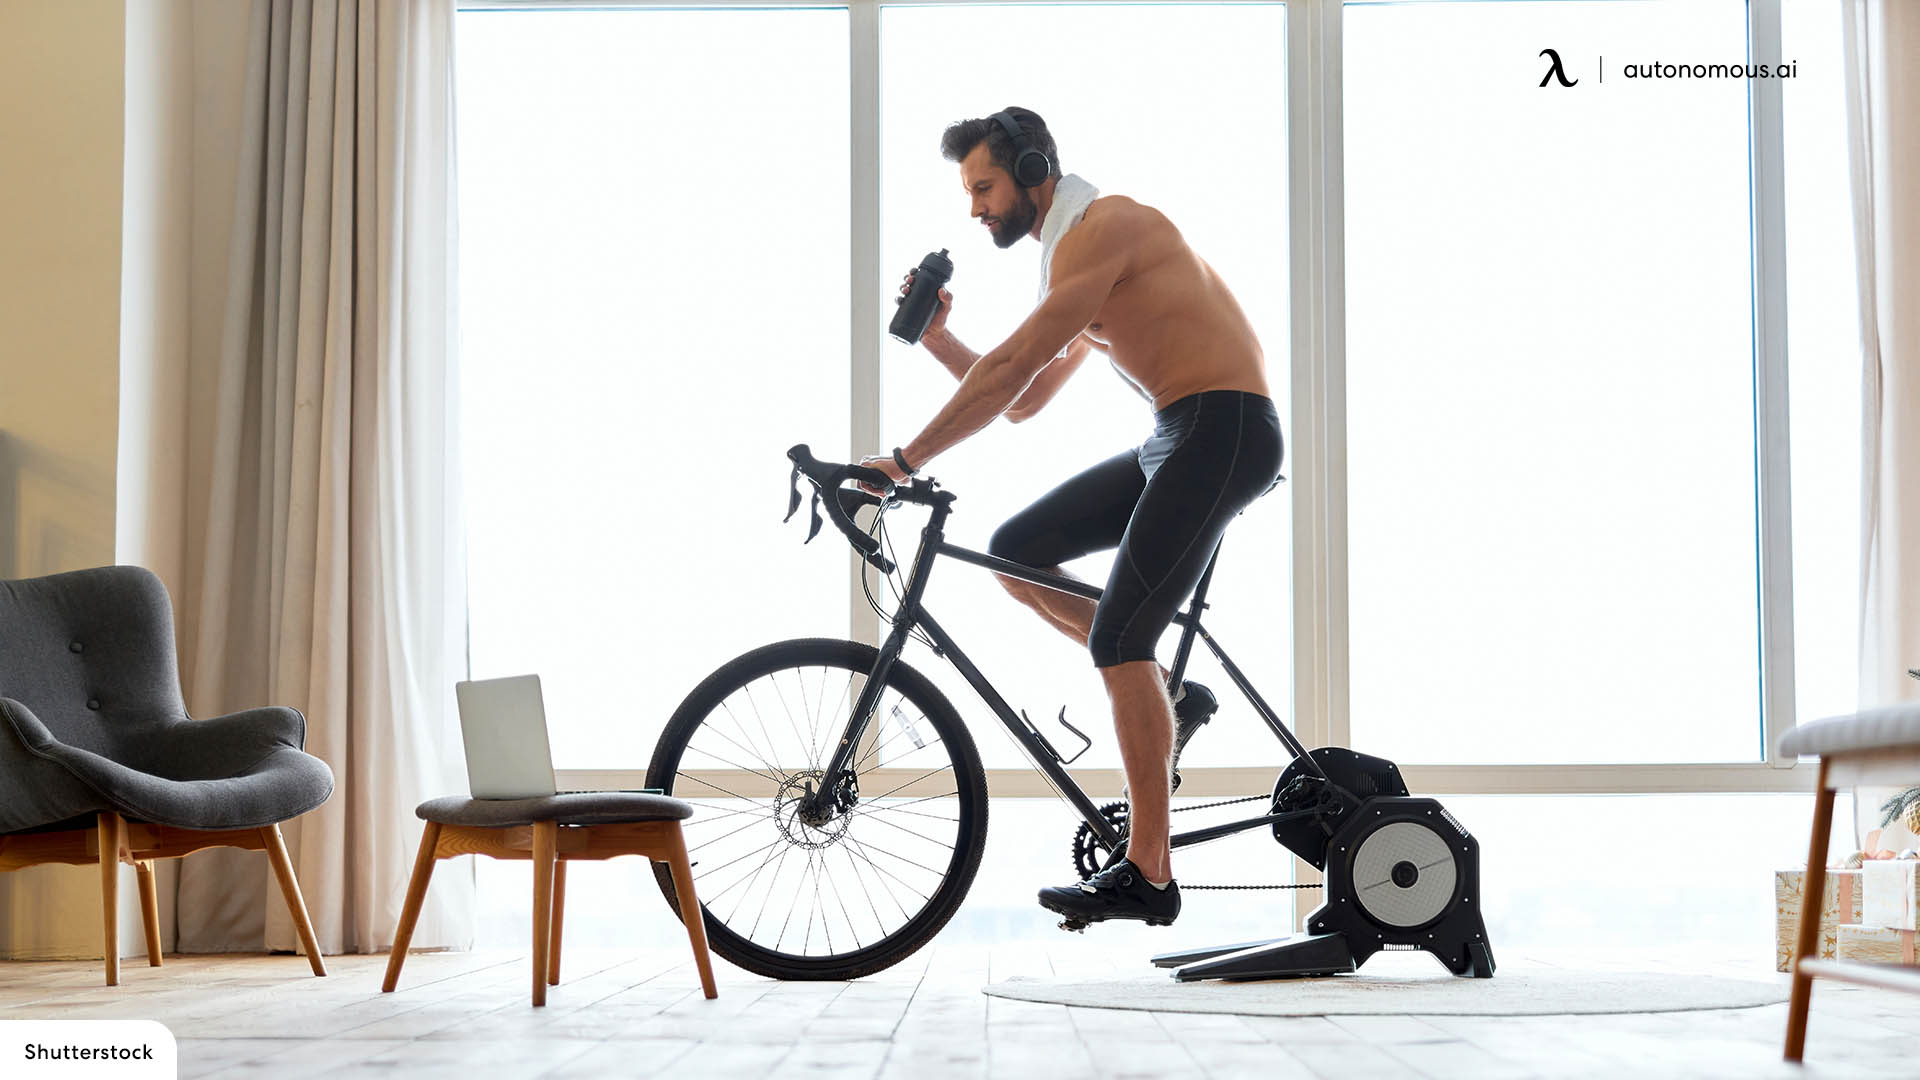 The benefits of indoor cycling are also significant